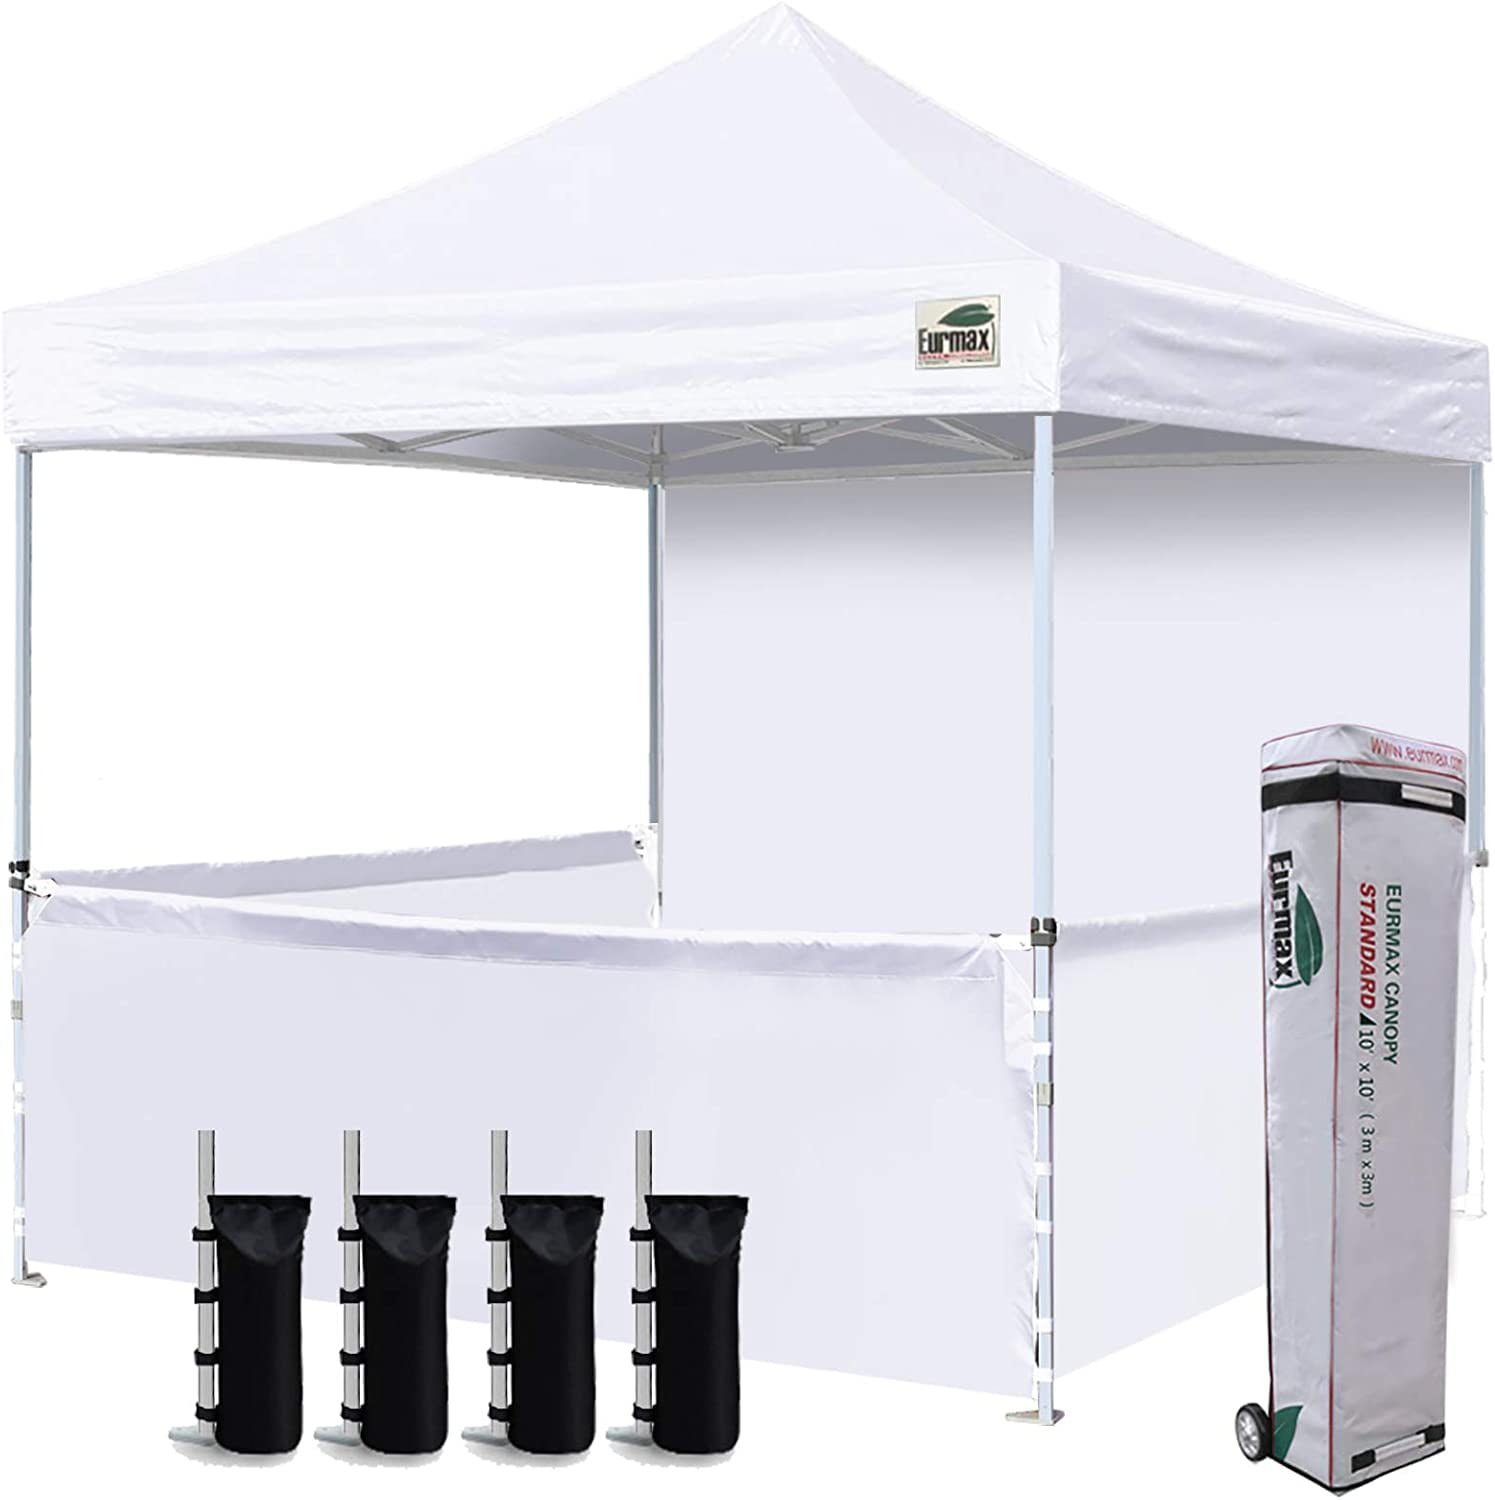 Eurmax 10x10 Ez Pop-up Booth Canopy Tent Commercial Instant Canopies with 1 Full Sidewall & 3 Half Walls and Roller Bag with 4 SandBags Blue 3 Cross-Bar 